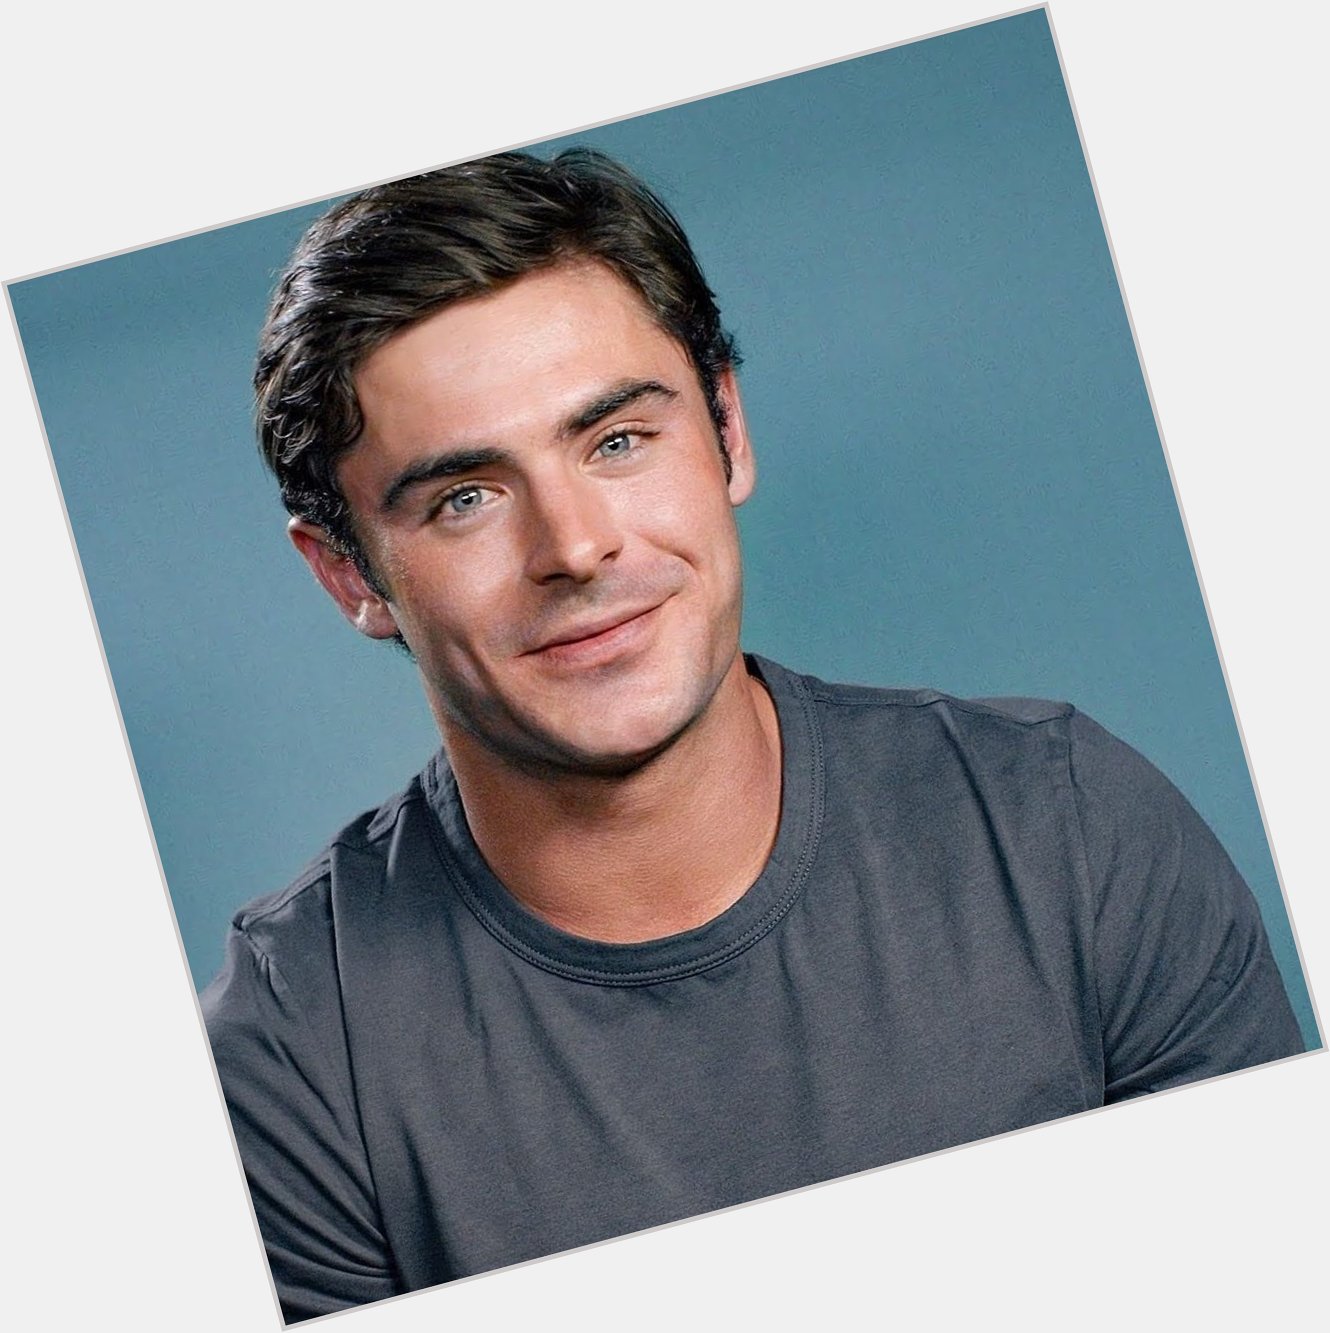 HAPPY BIRTHDAY ZAC EFRON! I hope you continue to be as amazing and as sexy as you are!  